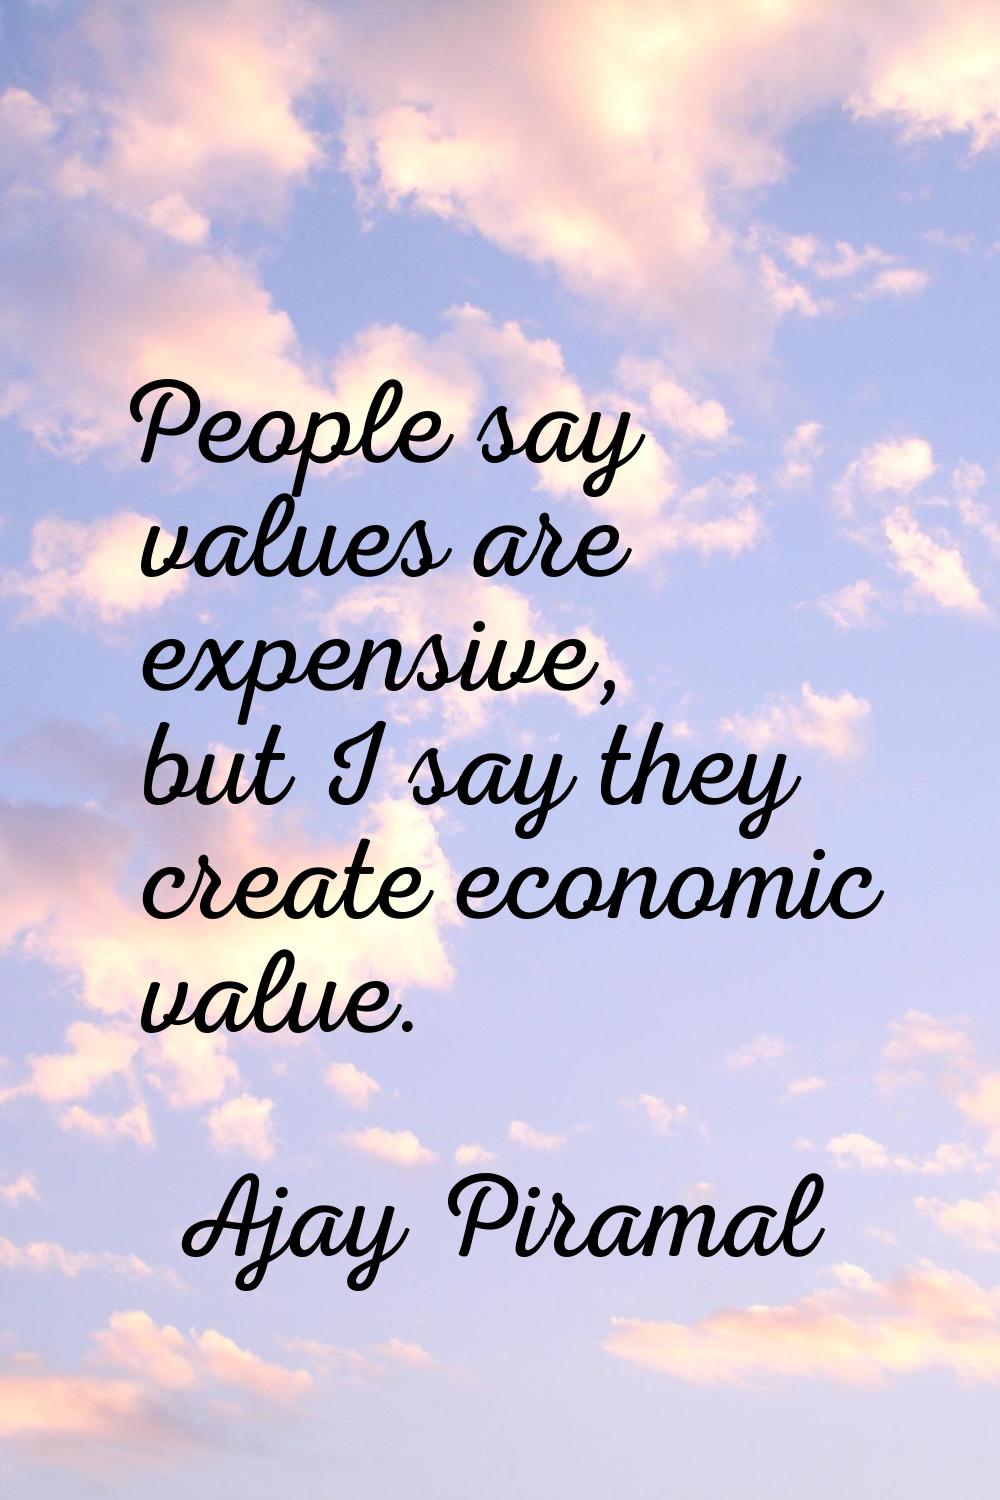 People say values are expensive, but I say they create economic value.